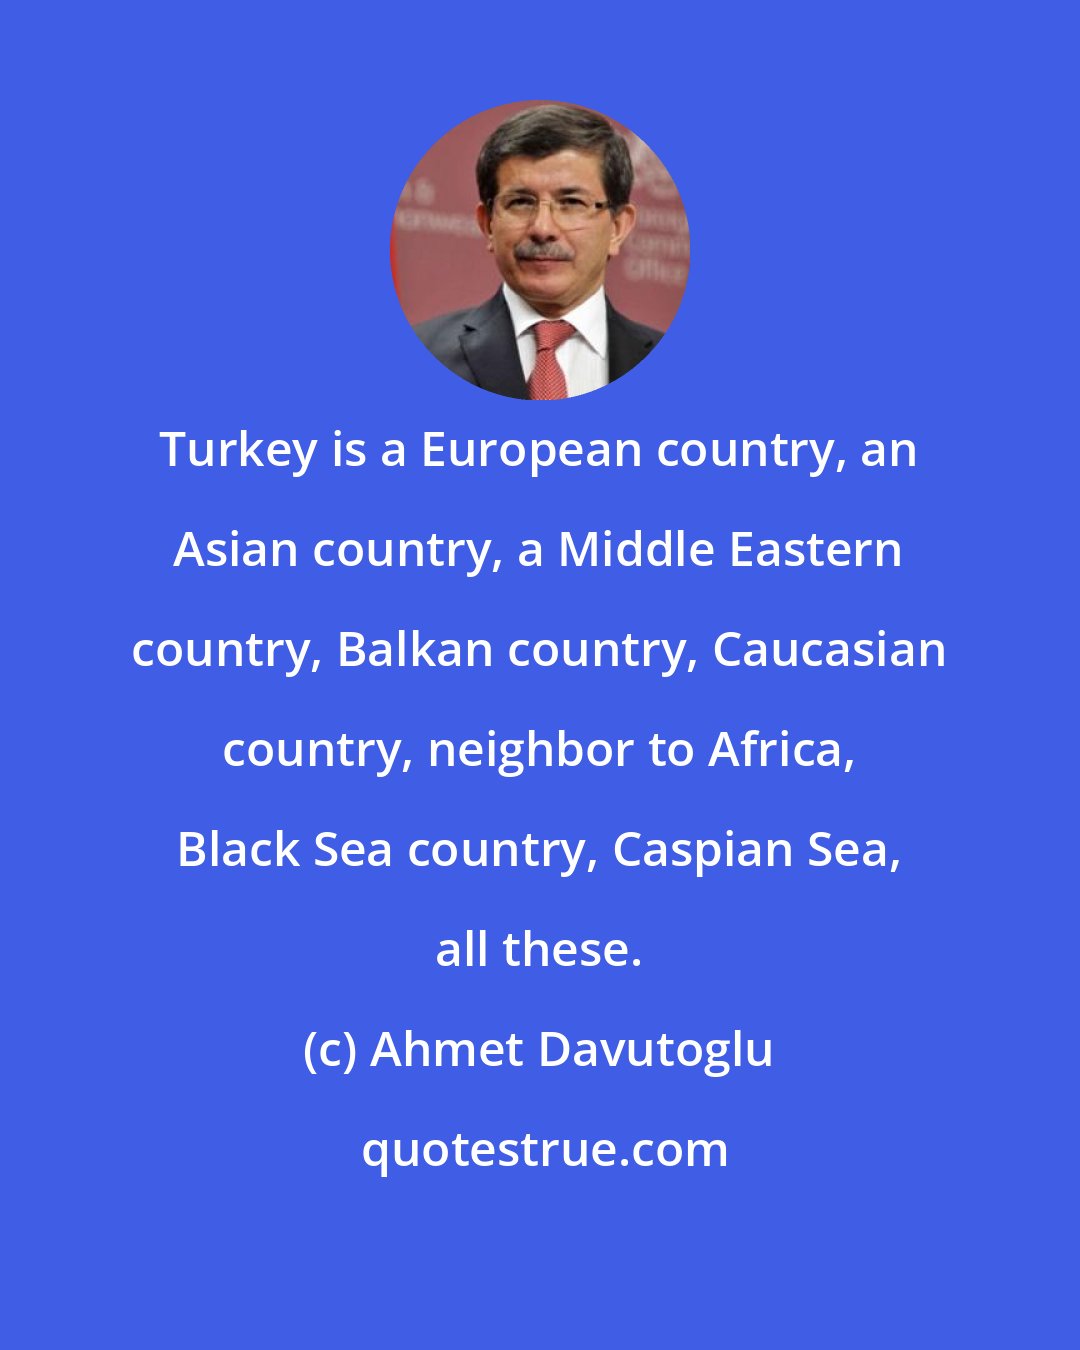 Ahmet Davutoglu: Turkey is a European country, an Asian country, a Middle Eastern country, Balkan country, Caucasian country, neighbor to Africa, Black Sea country, Caspian Sea, all these.